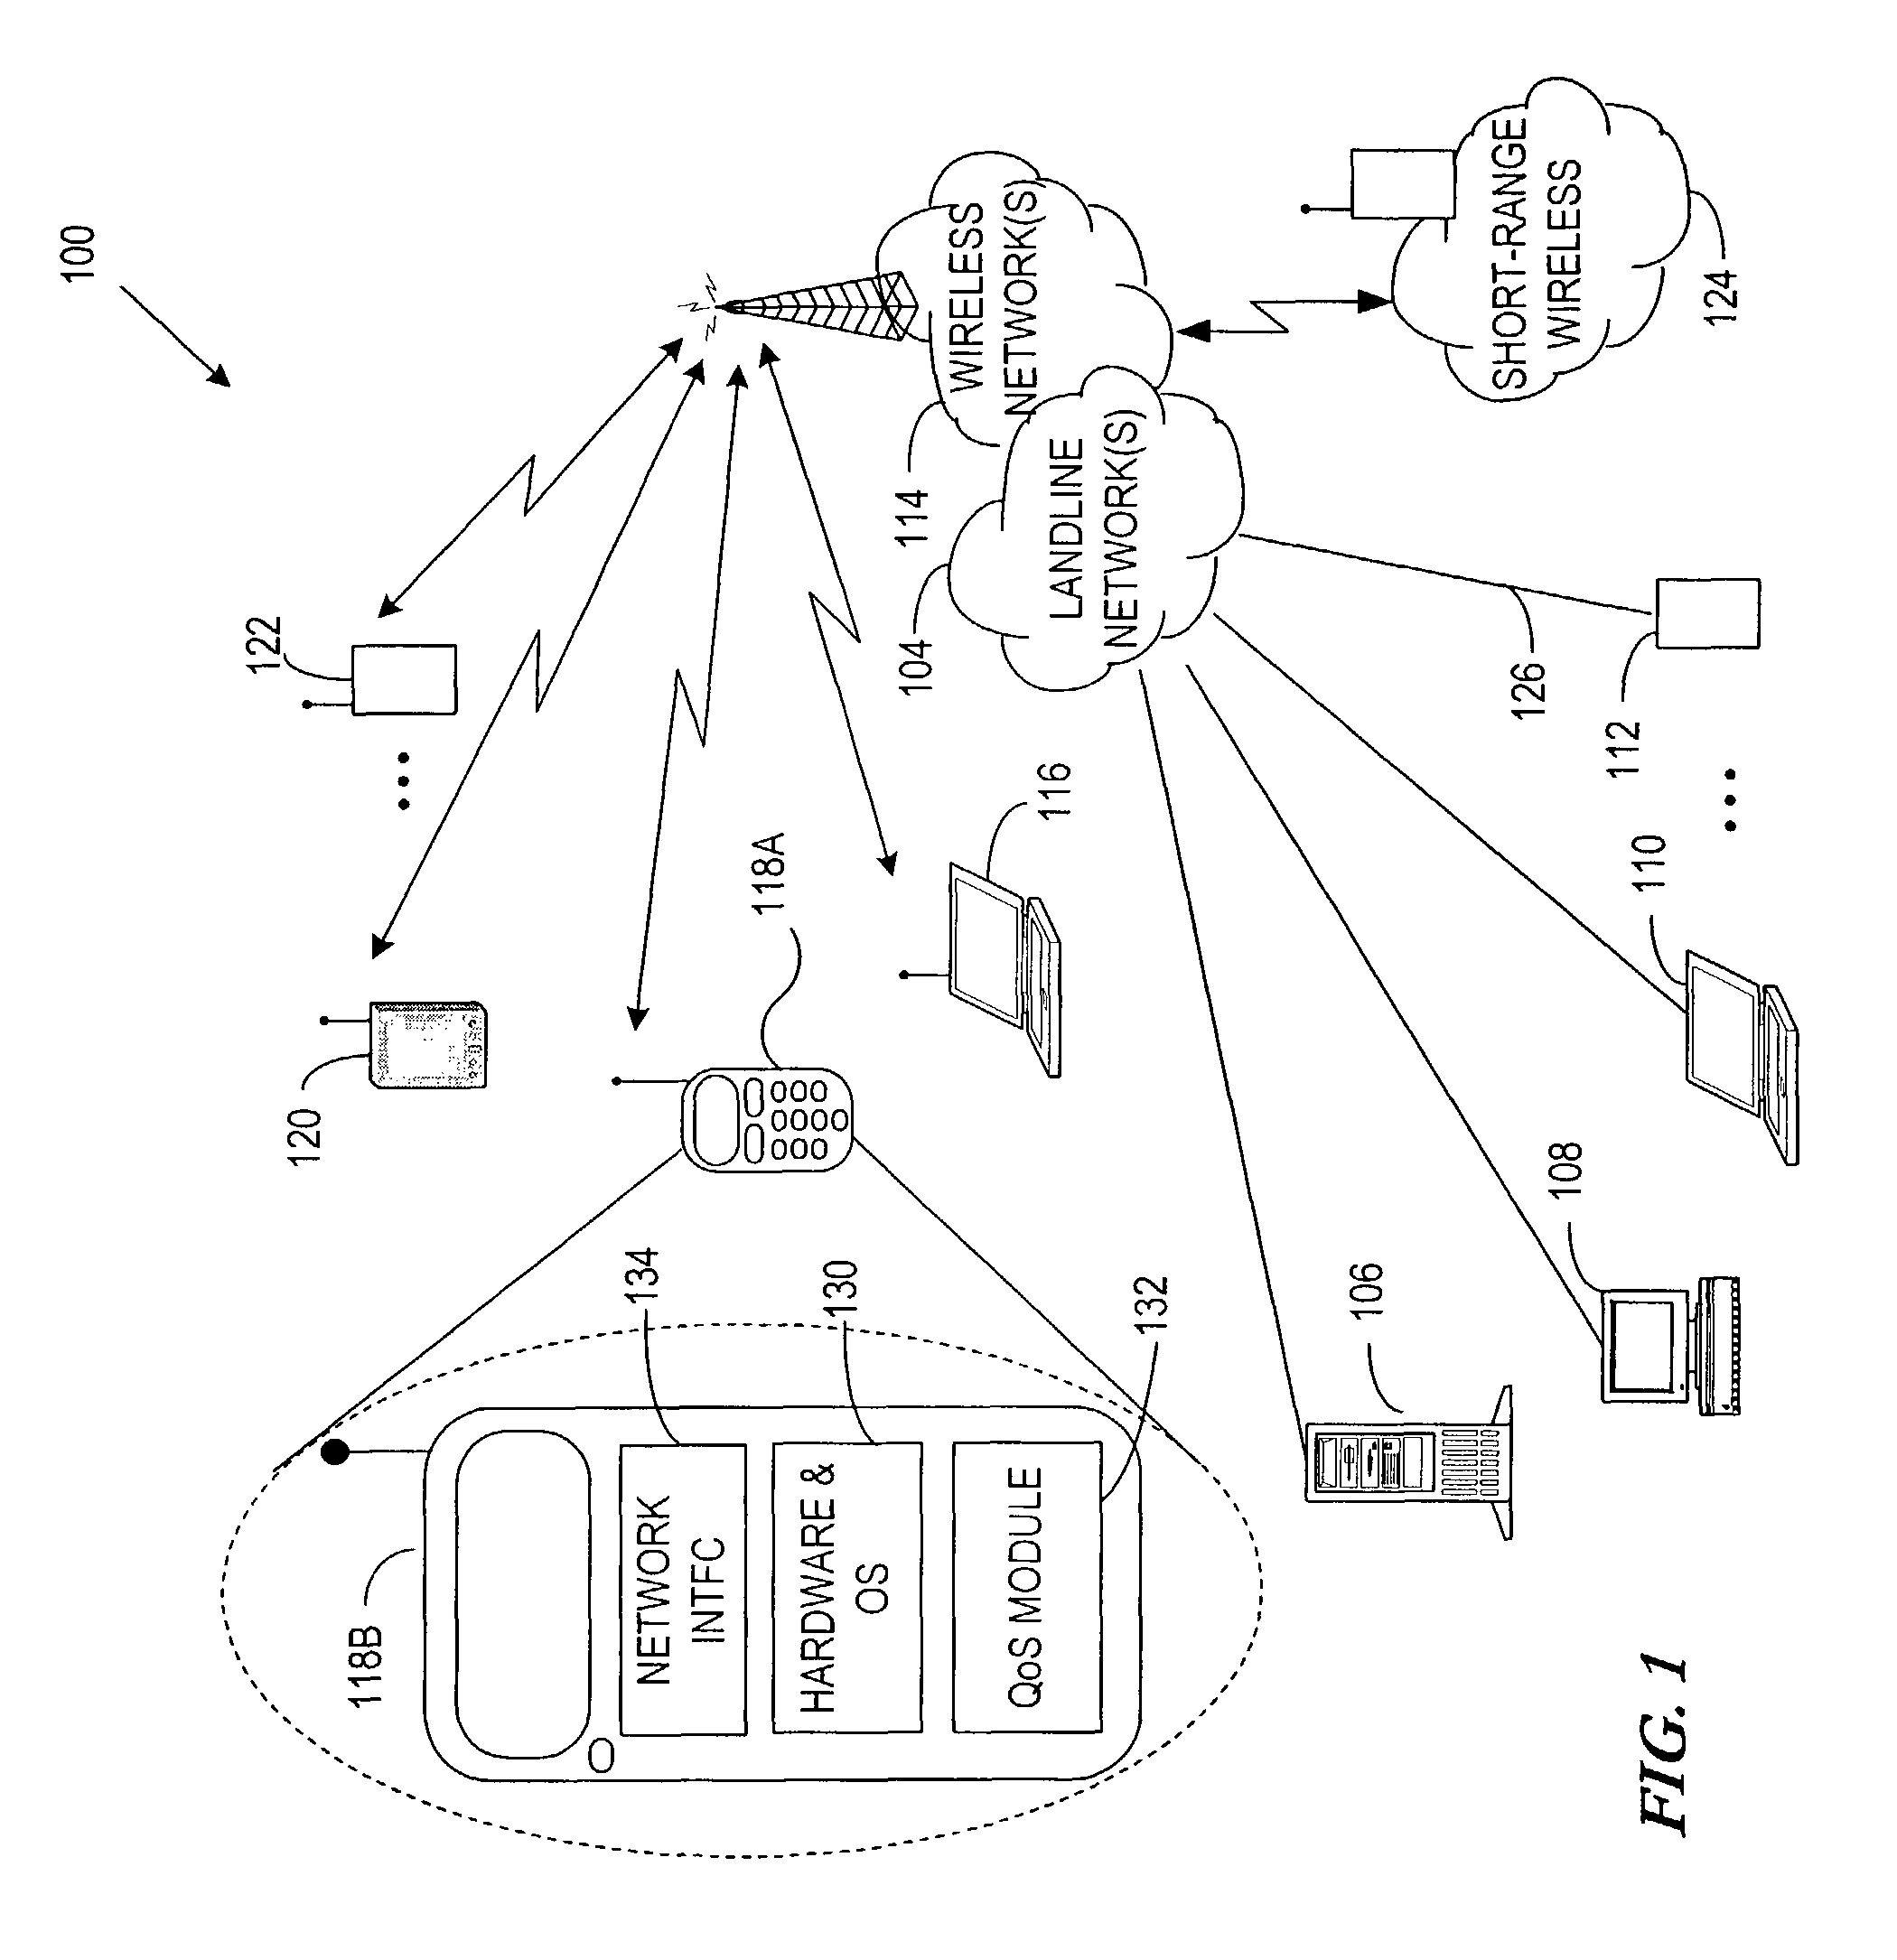 Apparatus and method for providing quality of service for a network data connection